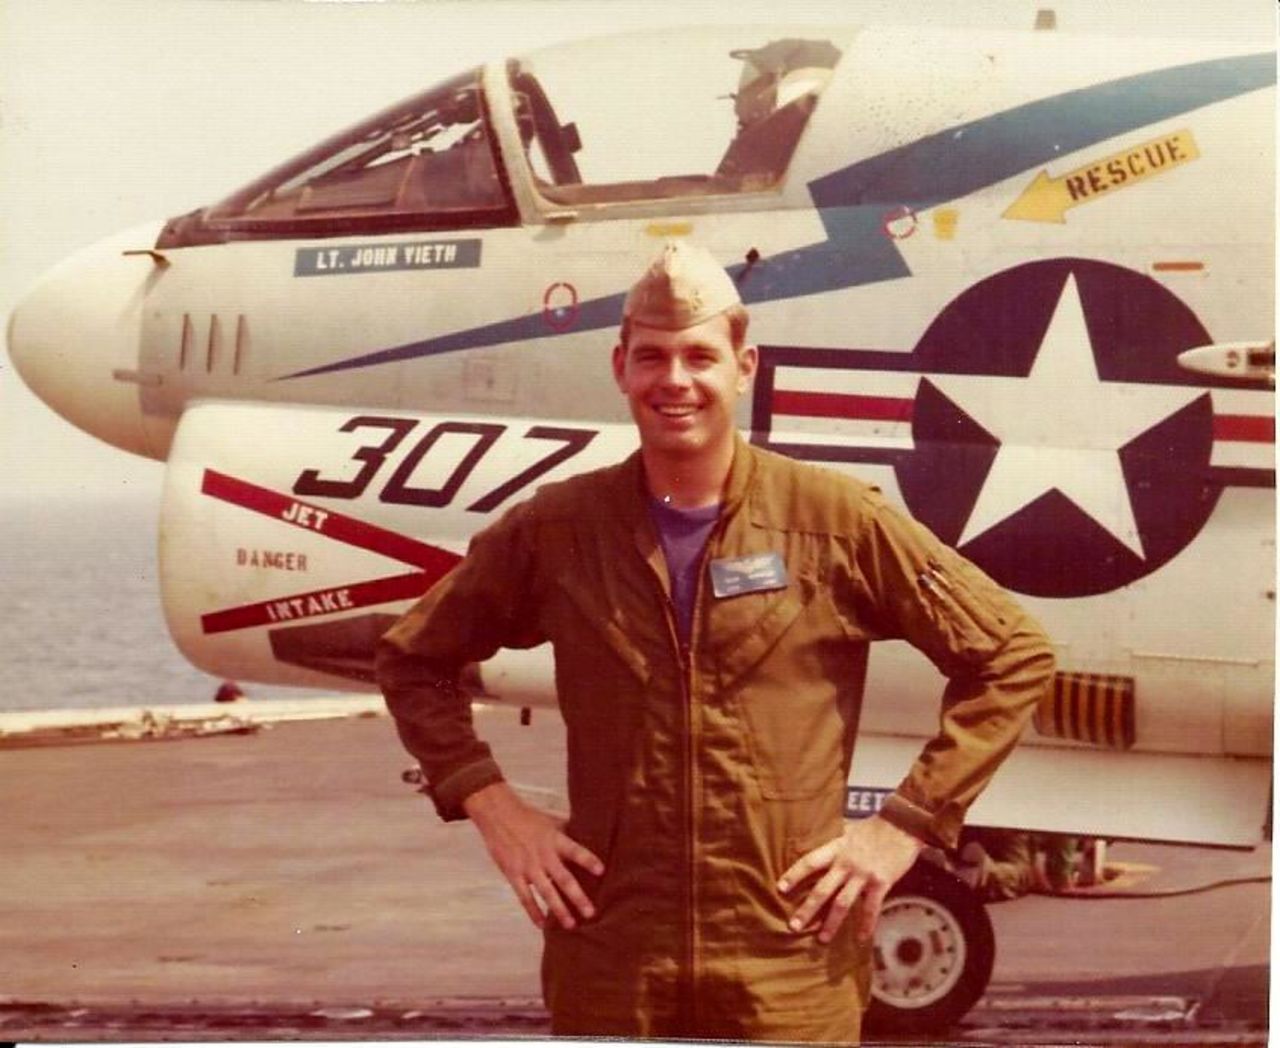 Bob Besal on the USS America in 1974 in the North Atlantic when he was a Lieutenant. Besal was piloting a Vought A-7C on a training mission when his aircraft collided with another plane at 15,000 feet, sending his jet into the Atlantic. He survived, but thought the plane lost.